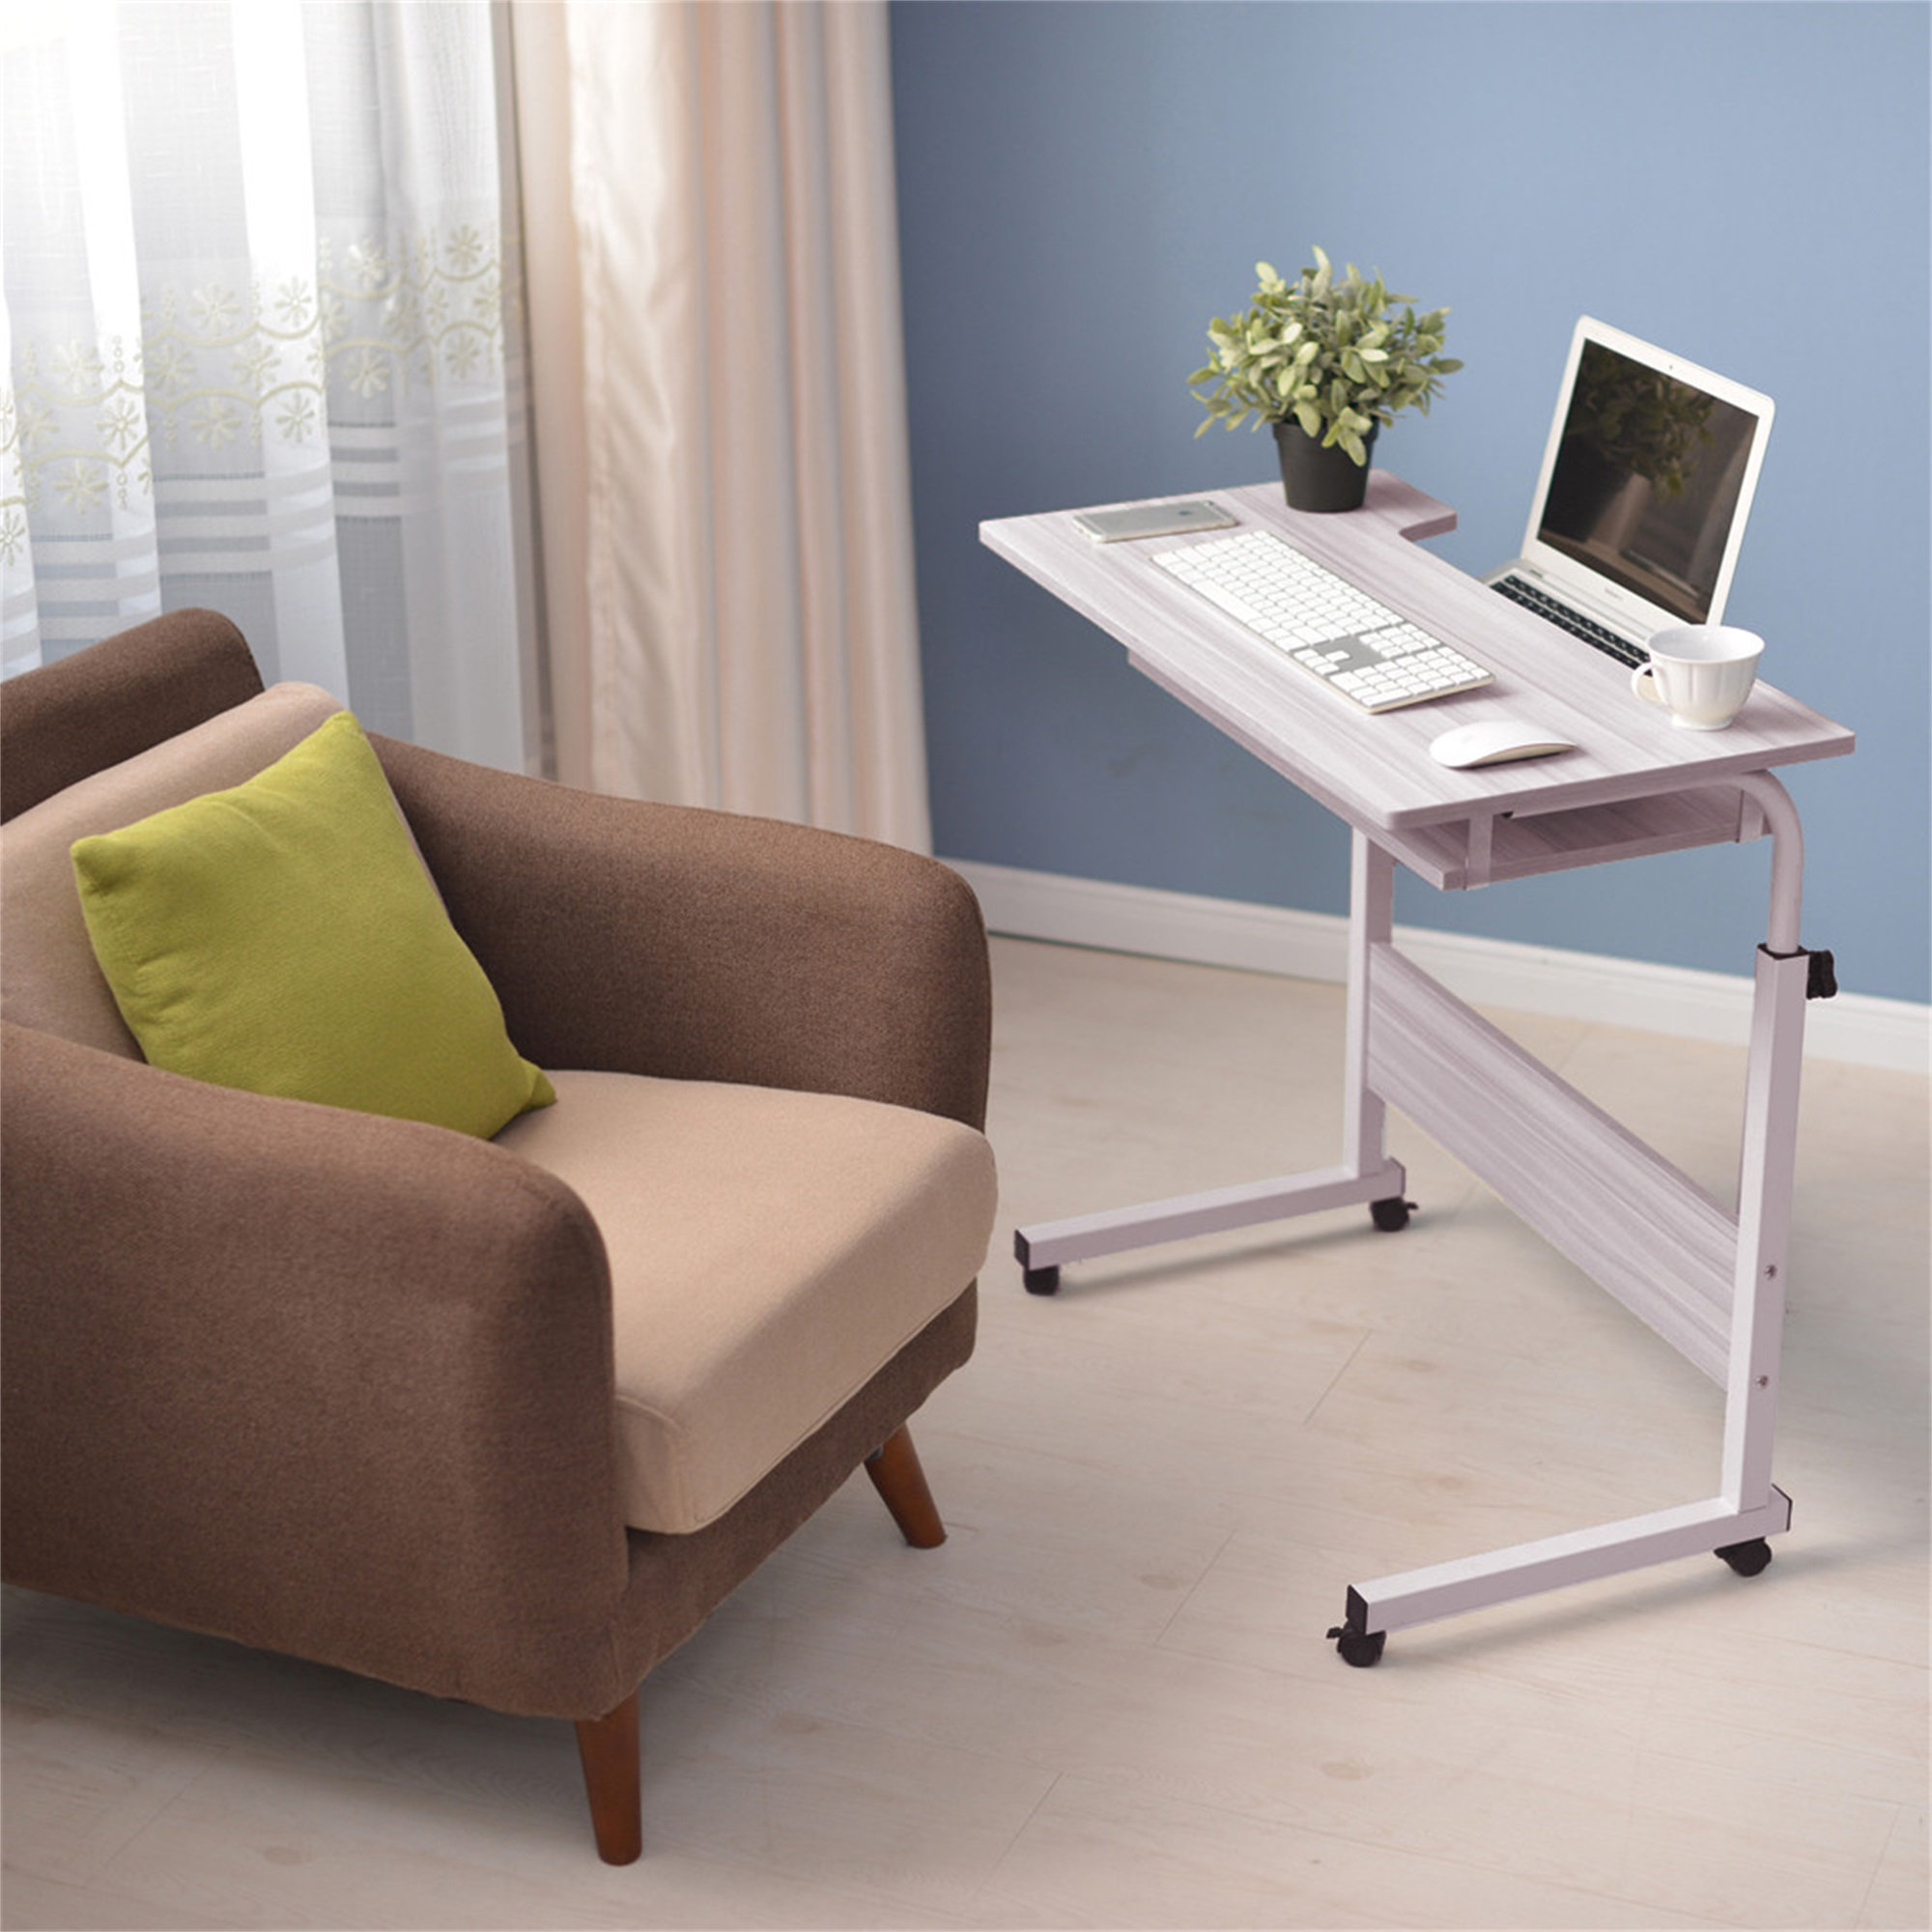 Details about   Foldable Portable Multifunction Laptop Desk  Thickened Tray waterproof Table 